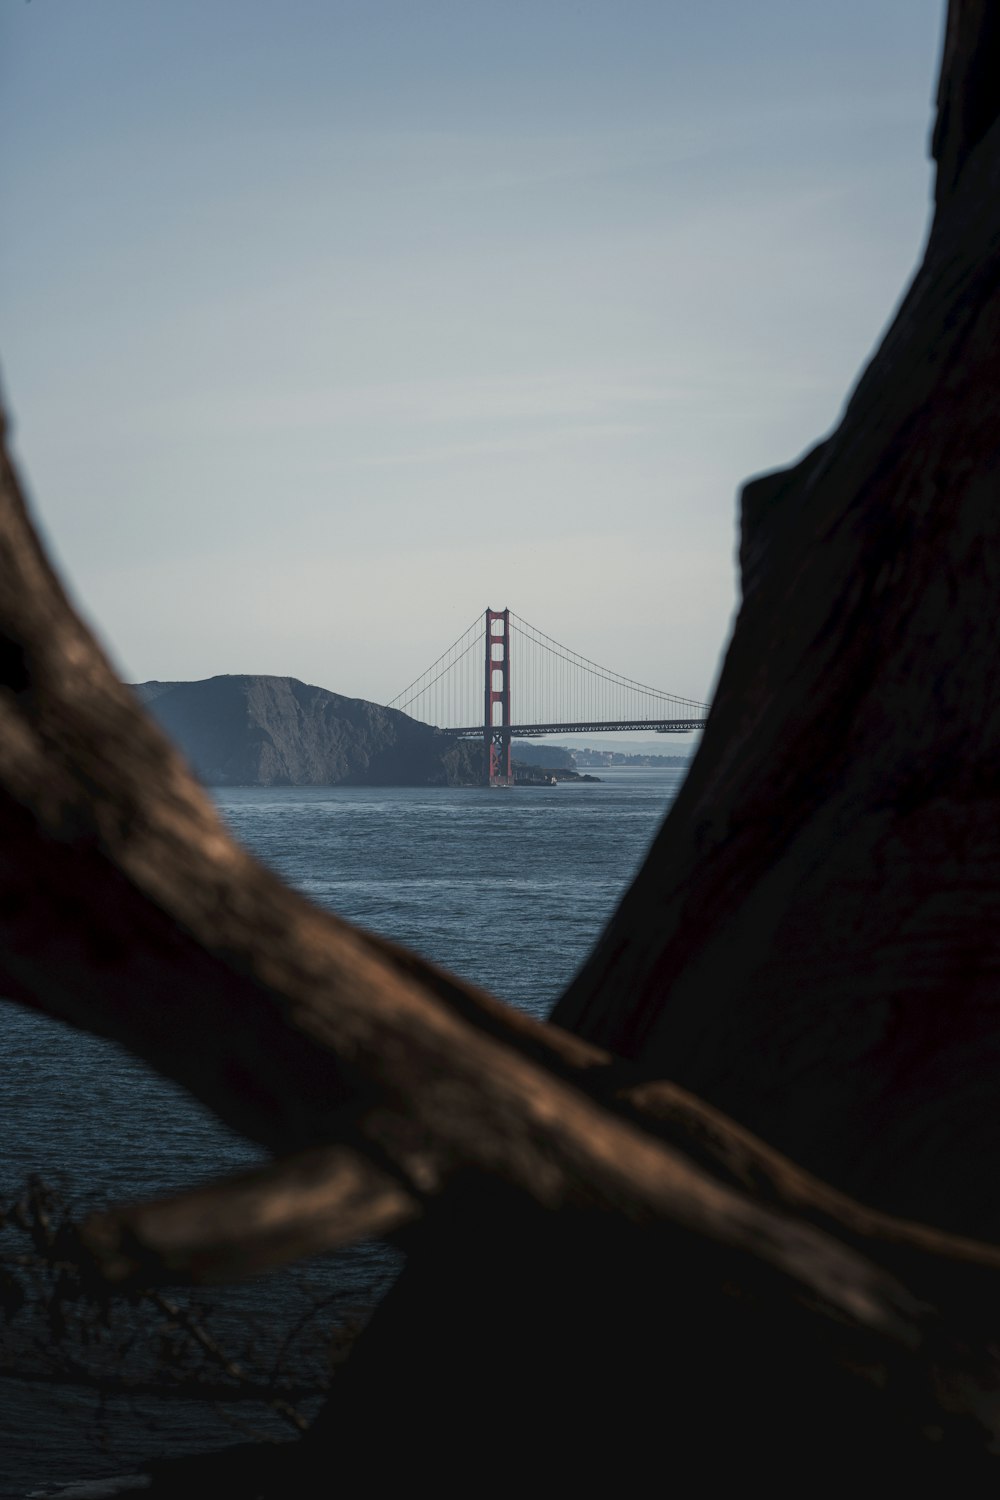 a view of the golden gate bridge from across the bay